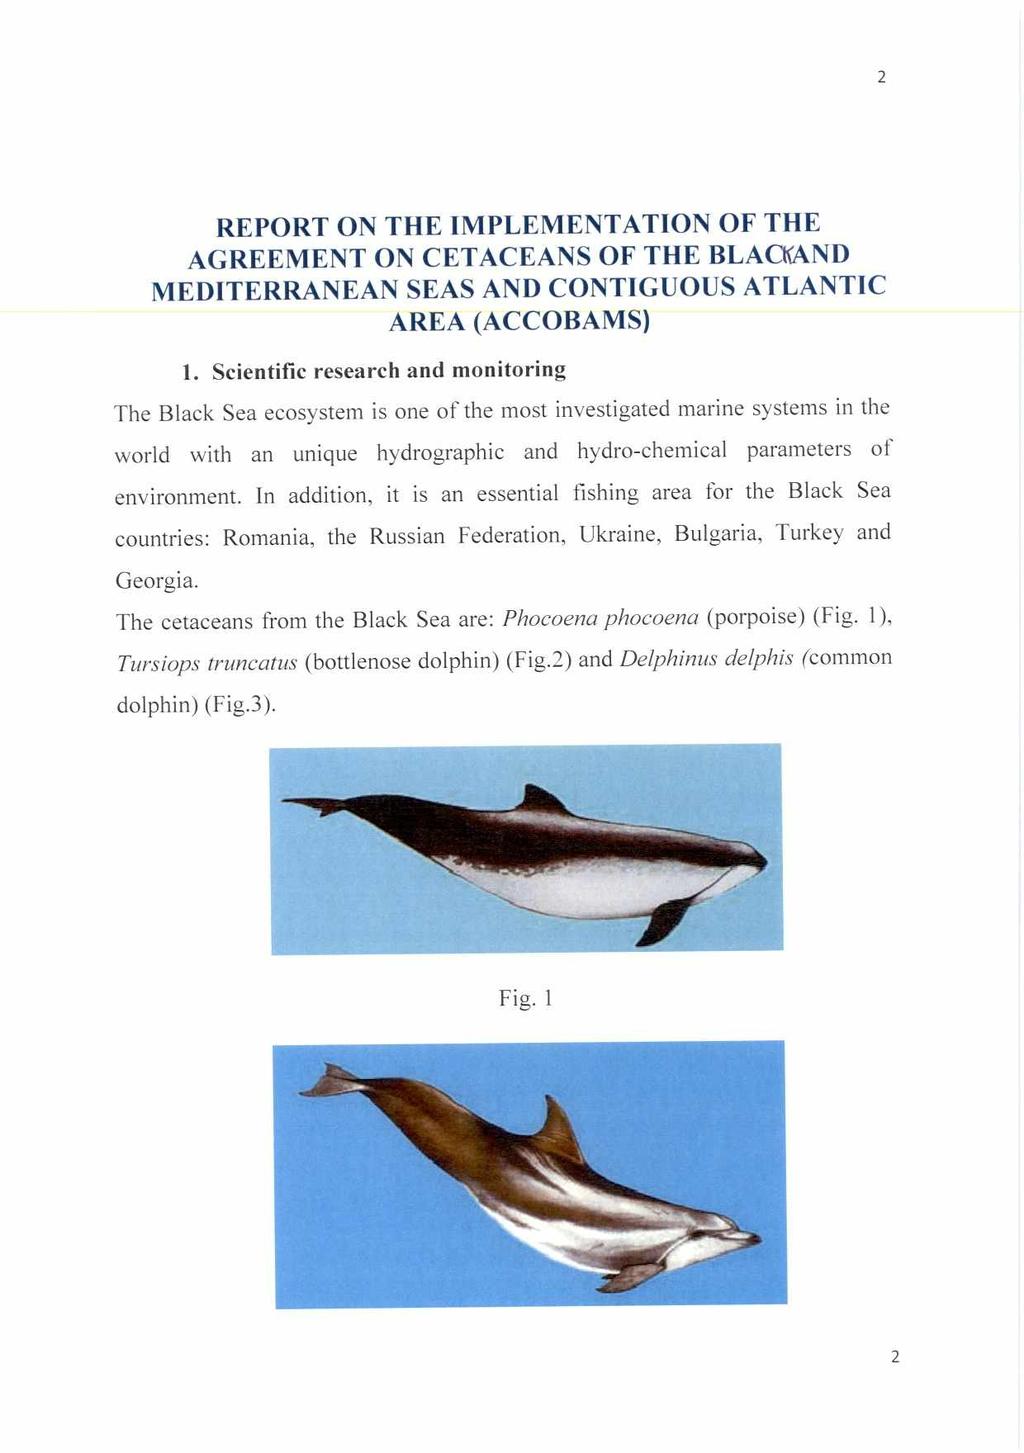 2 REPORT ON THE IMPLEMENTATION OF THE AGREEMENT ON CETACEANS OF THE BLACKAND MEDITERRANEAN SEAS AND CONTIGUOUS ATLANTIC AREA (ACCOBAMS) 1.